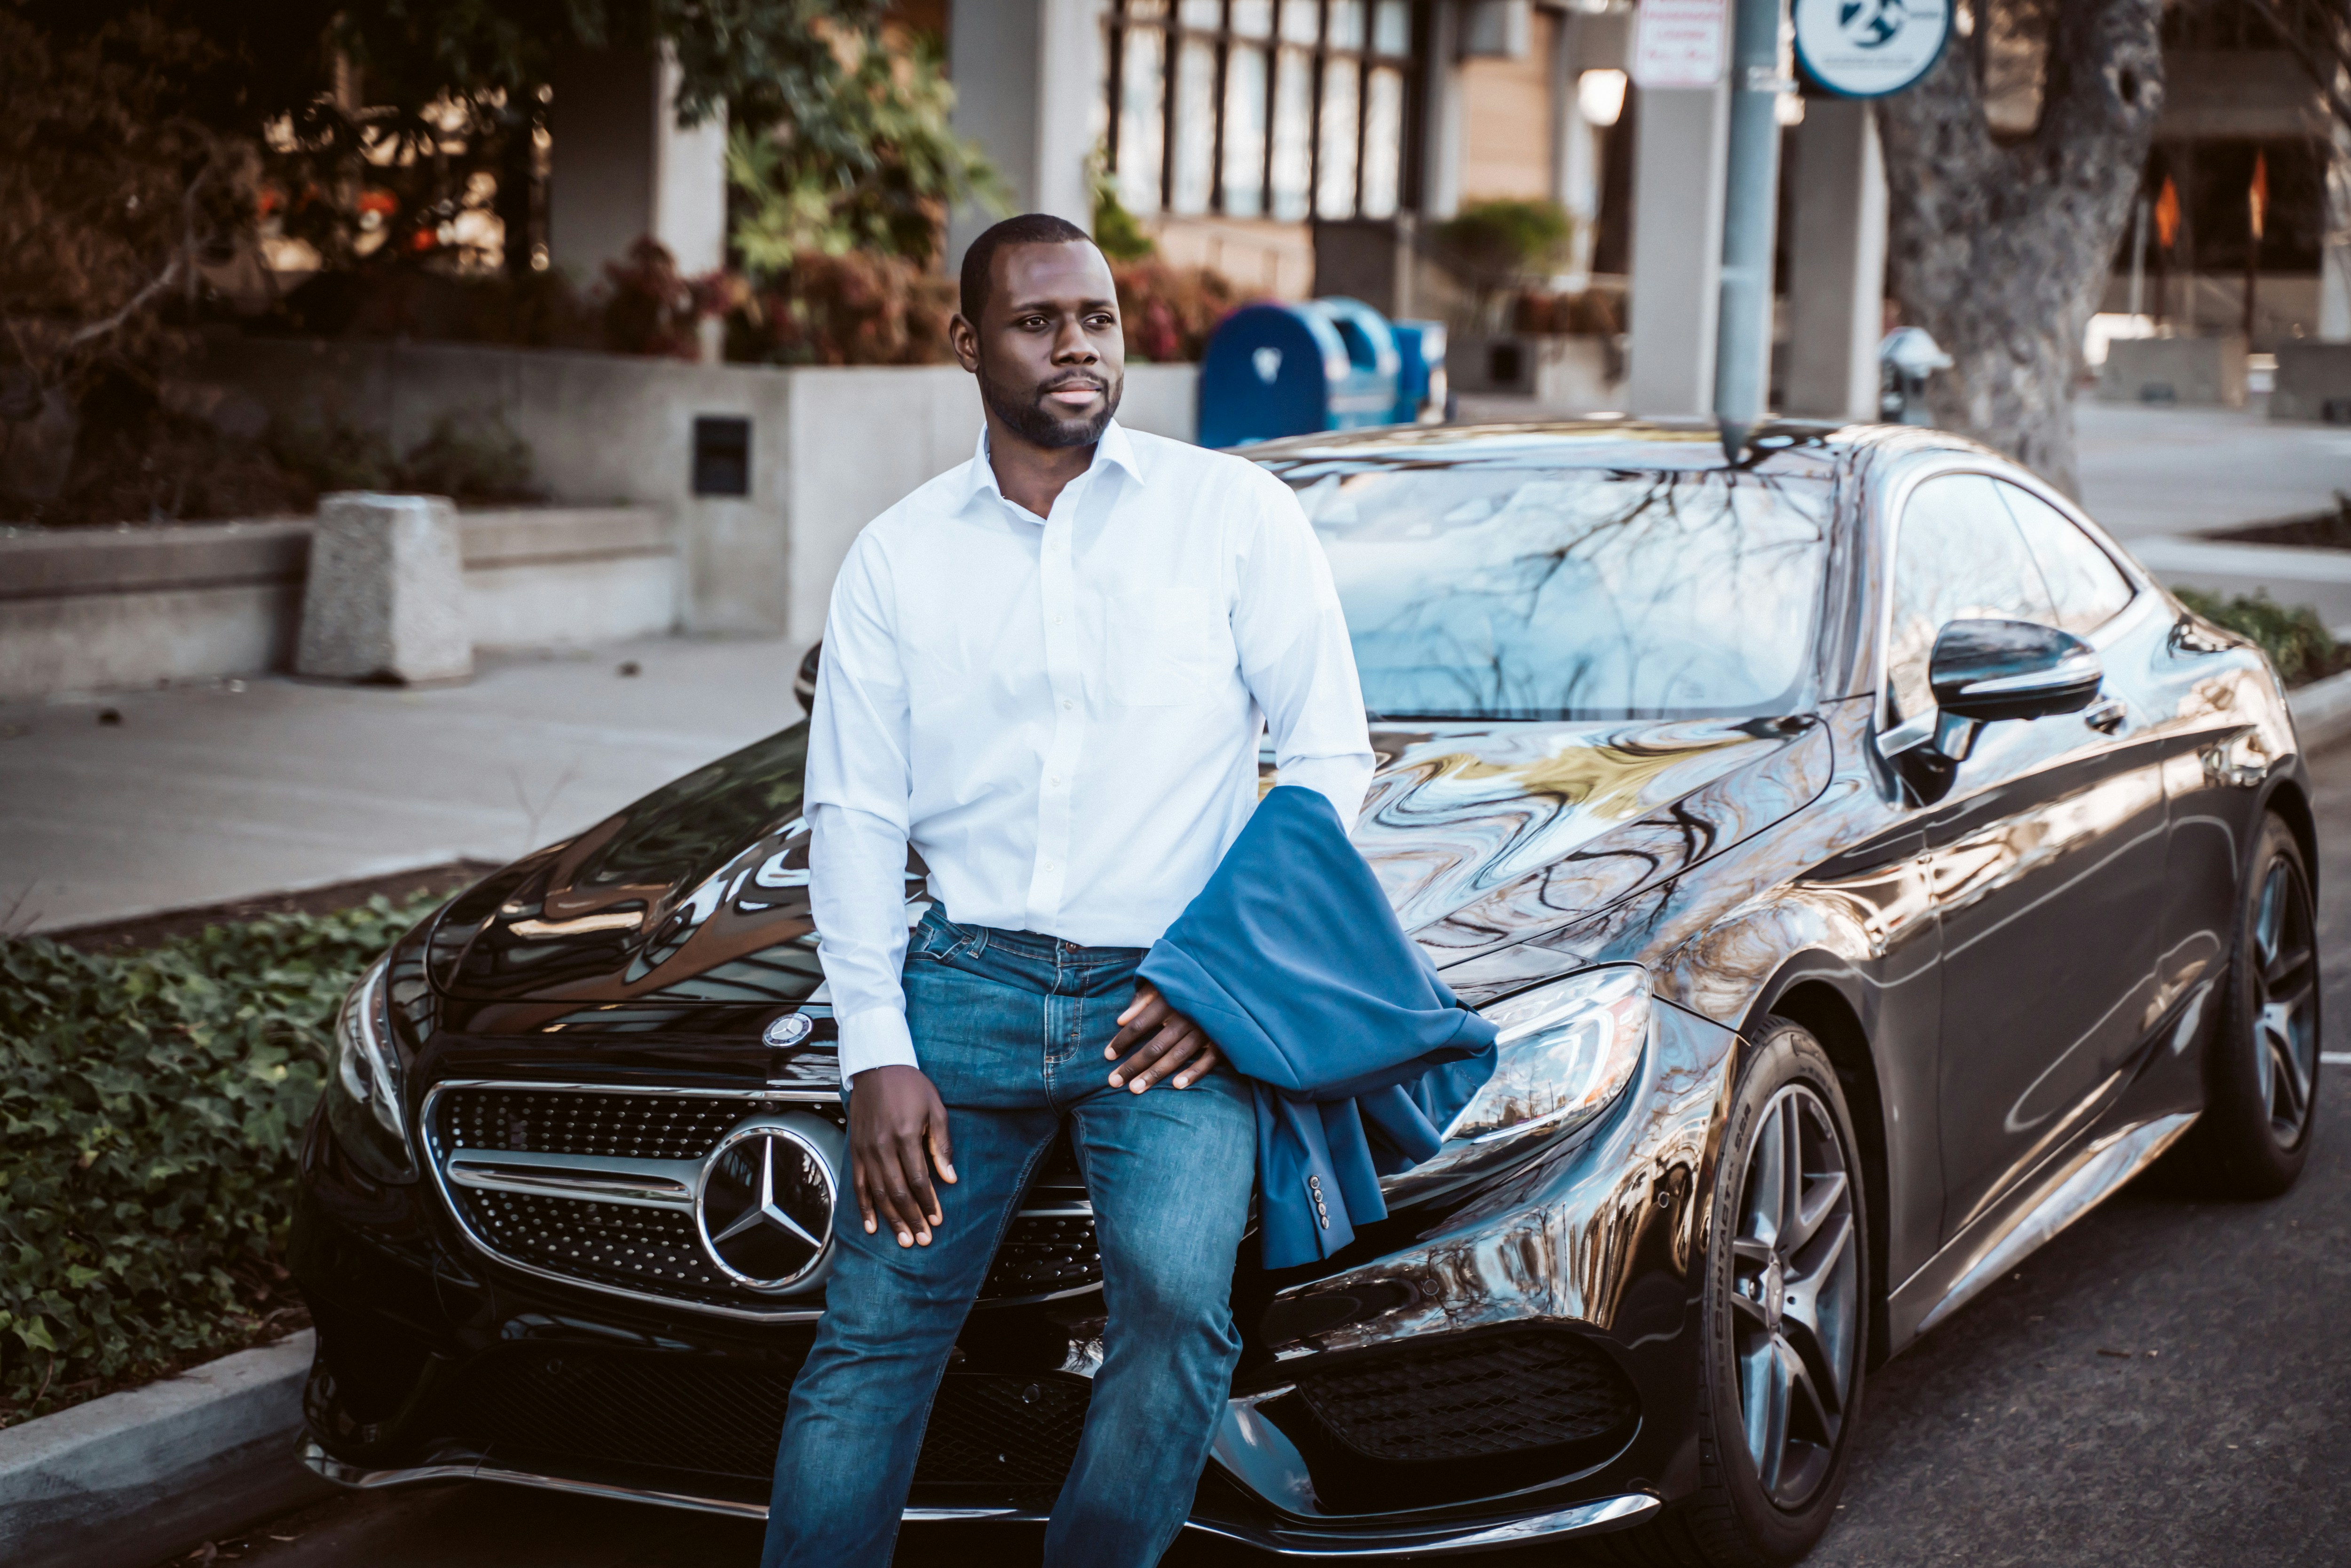 great photo recipe,how to photograph fortune vieyra dressed in business casual clothing and sitting on the hood of a mercedes with hand on jeans in the city..; man in white dress shirt and blue denim jeans standing beside black car during daytime